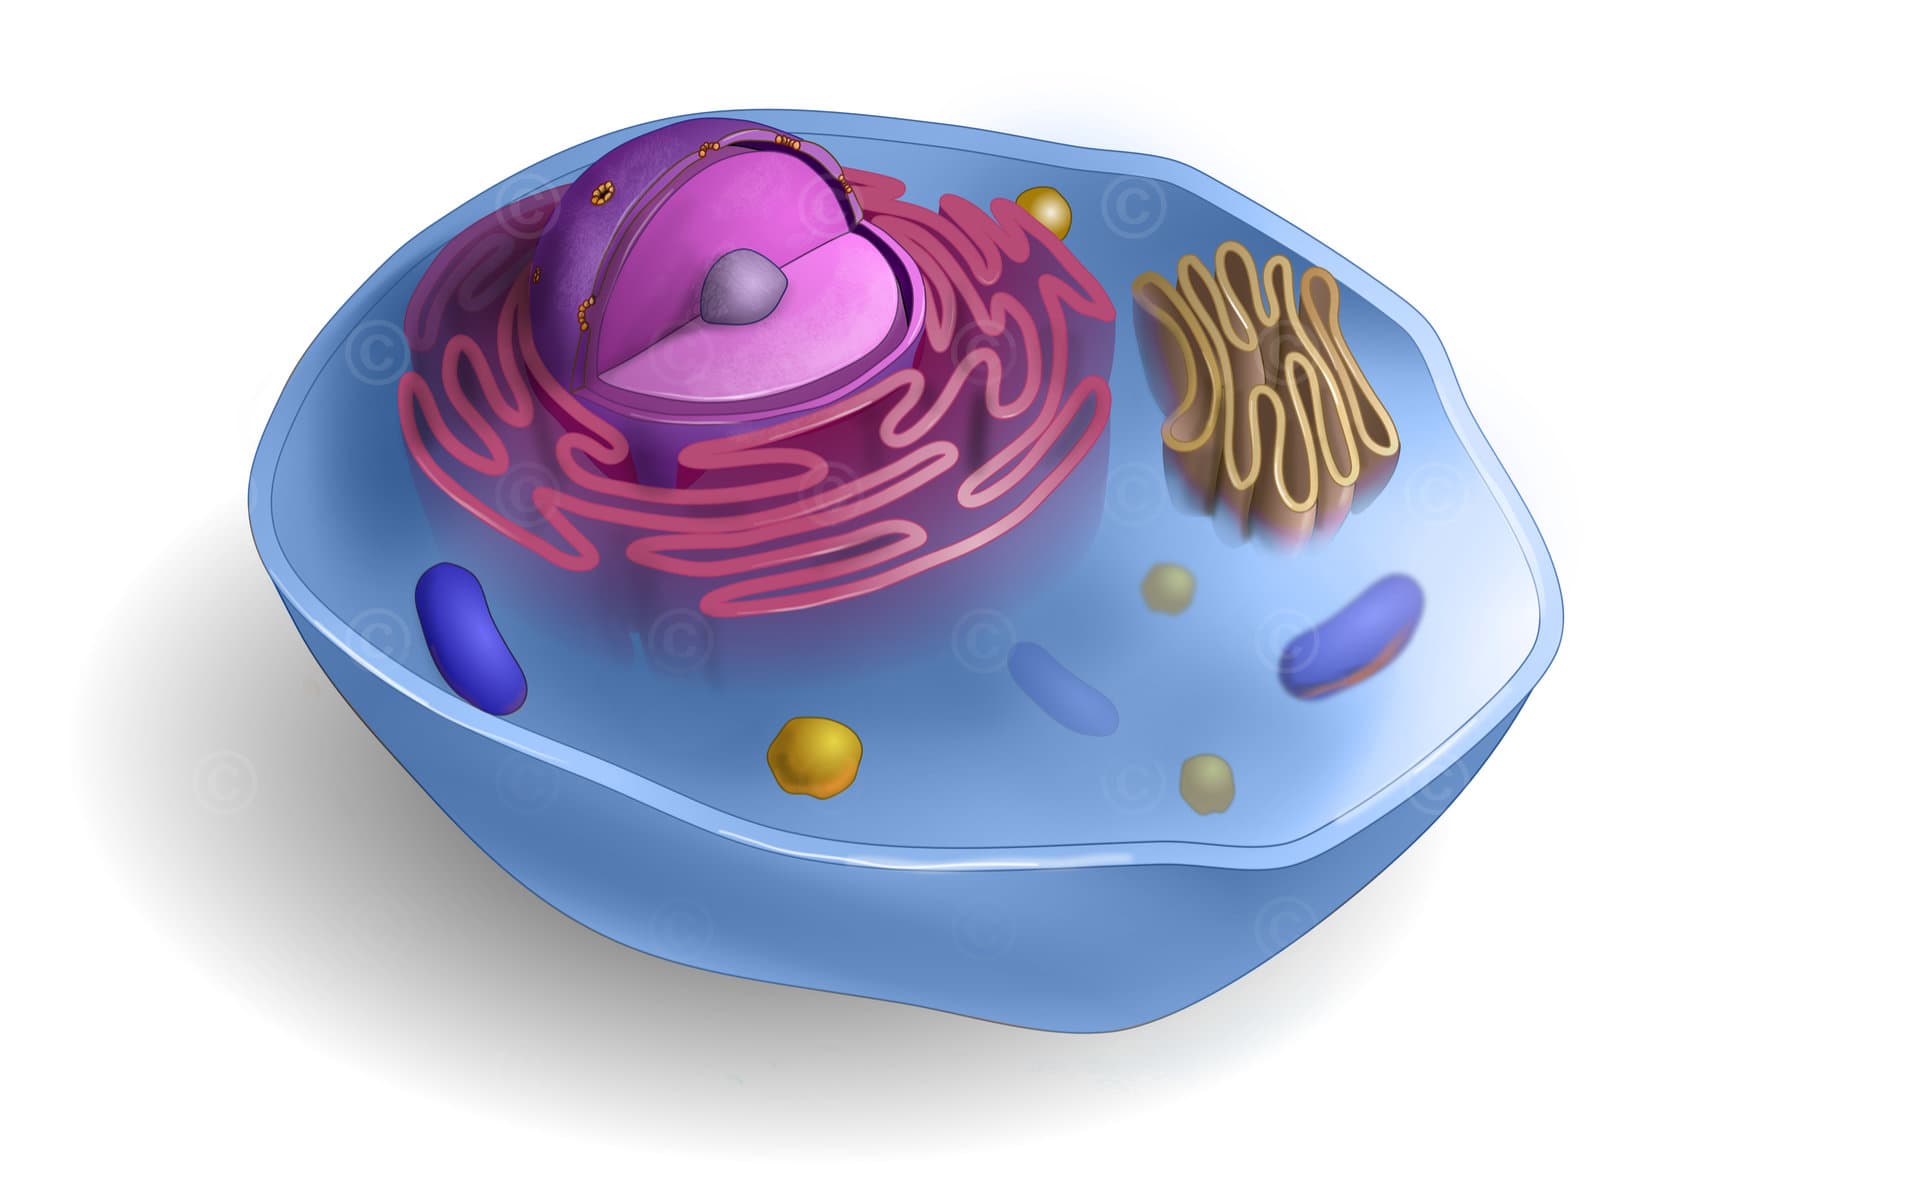 Anatomy of a cell